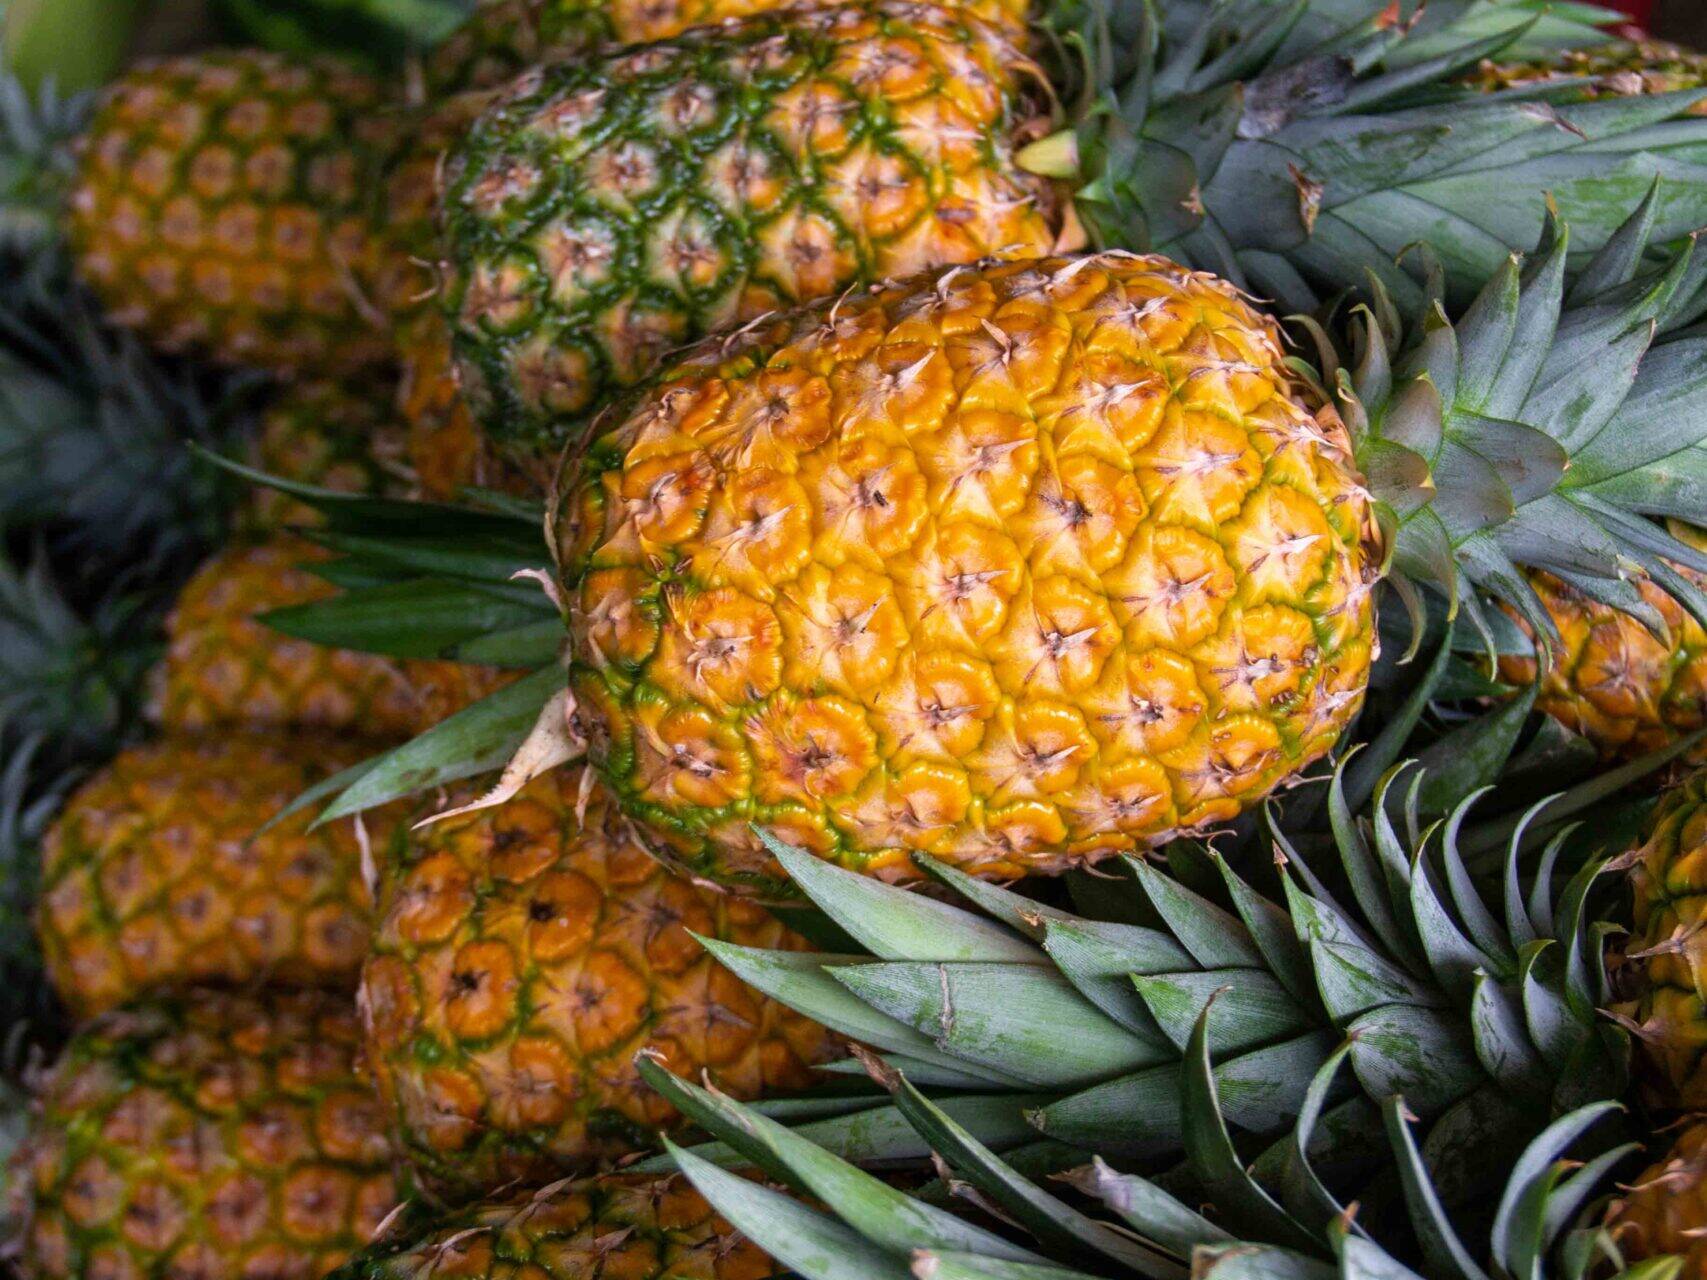 Pineapples in Costa Rica